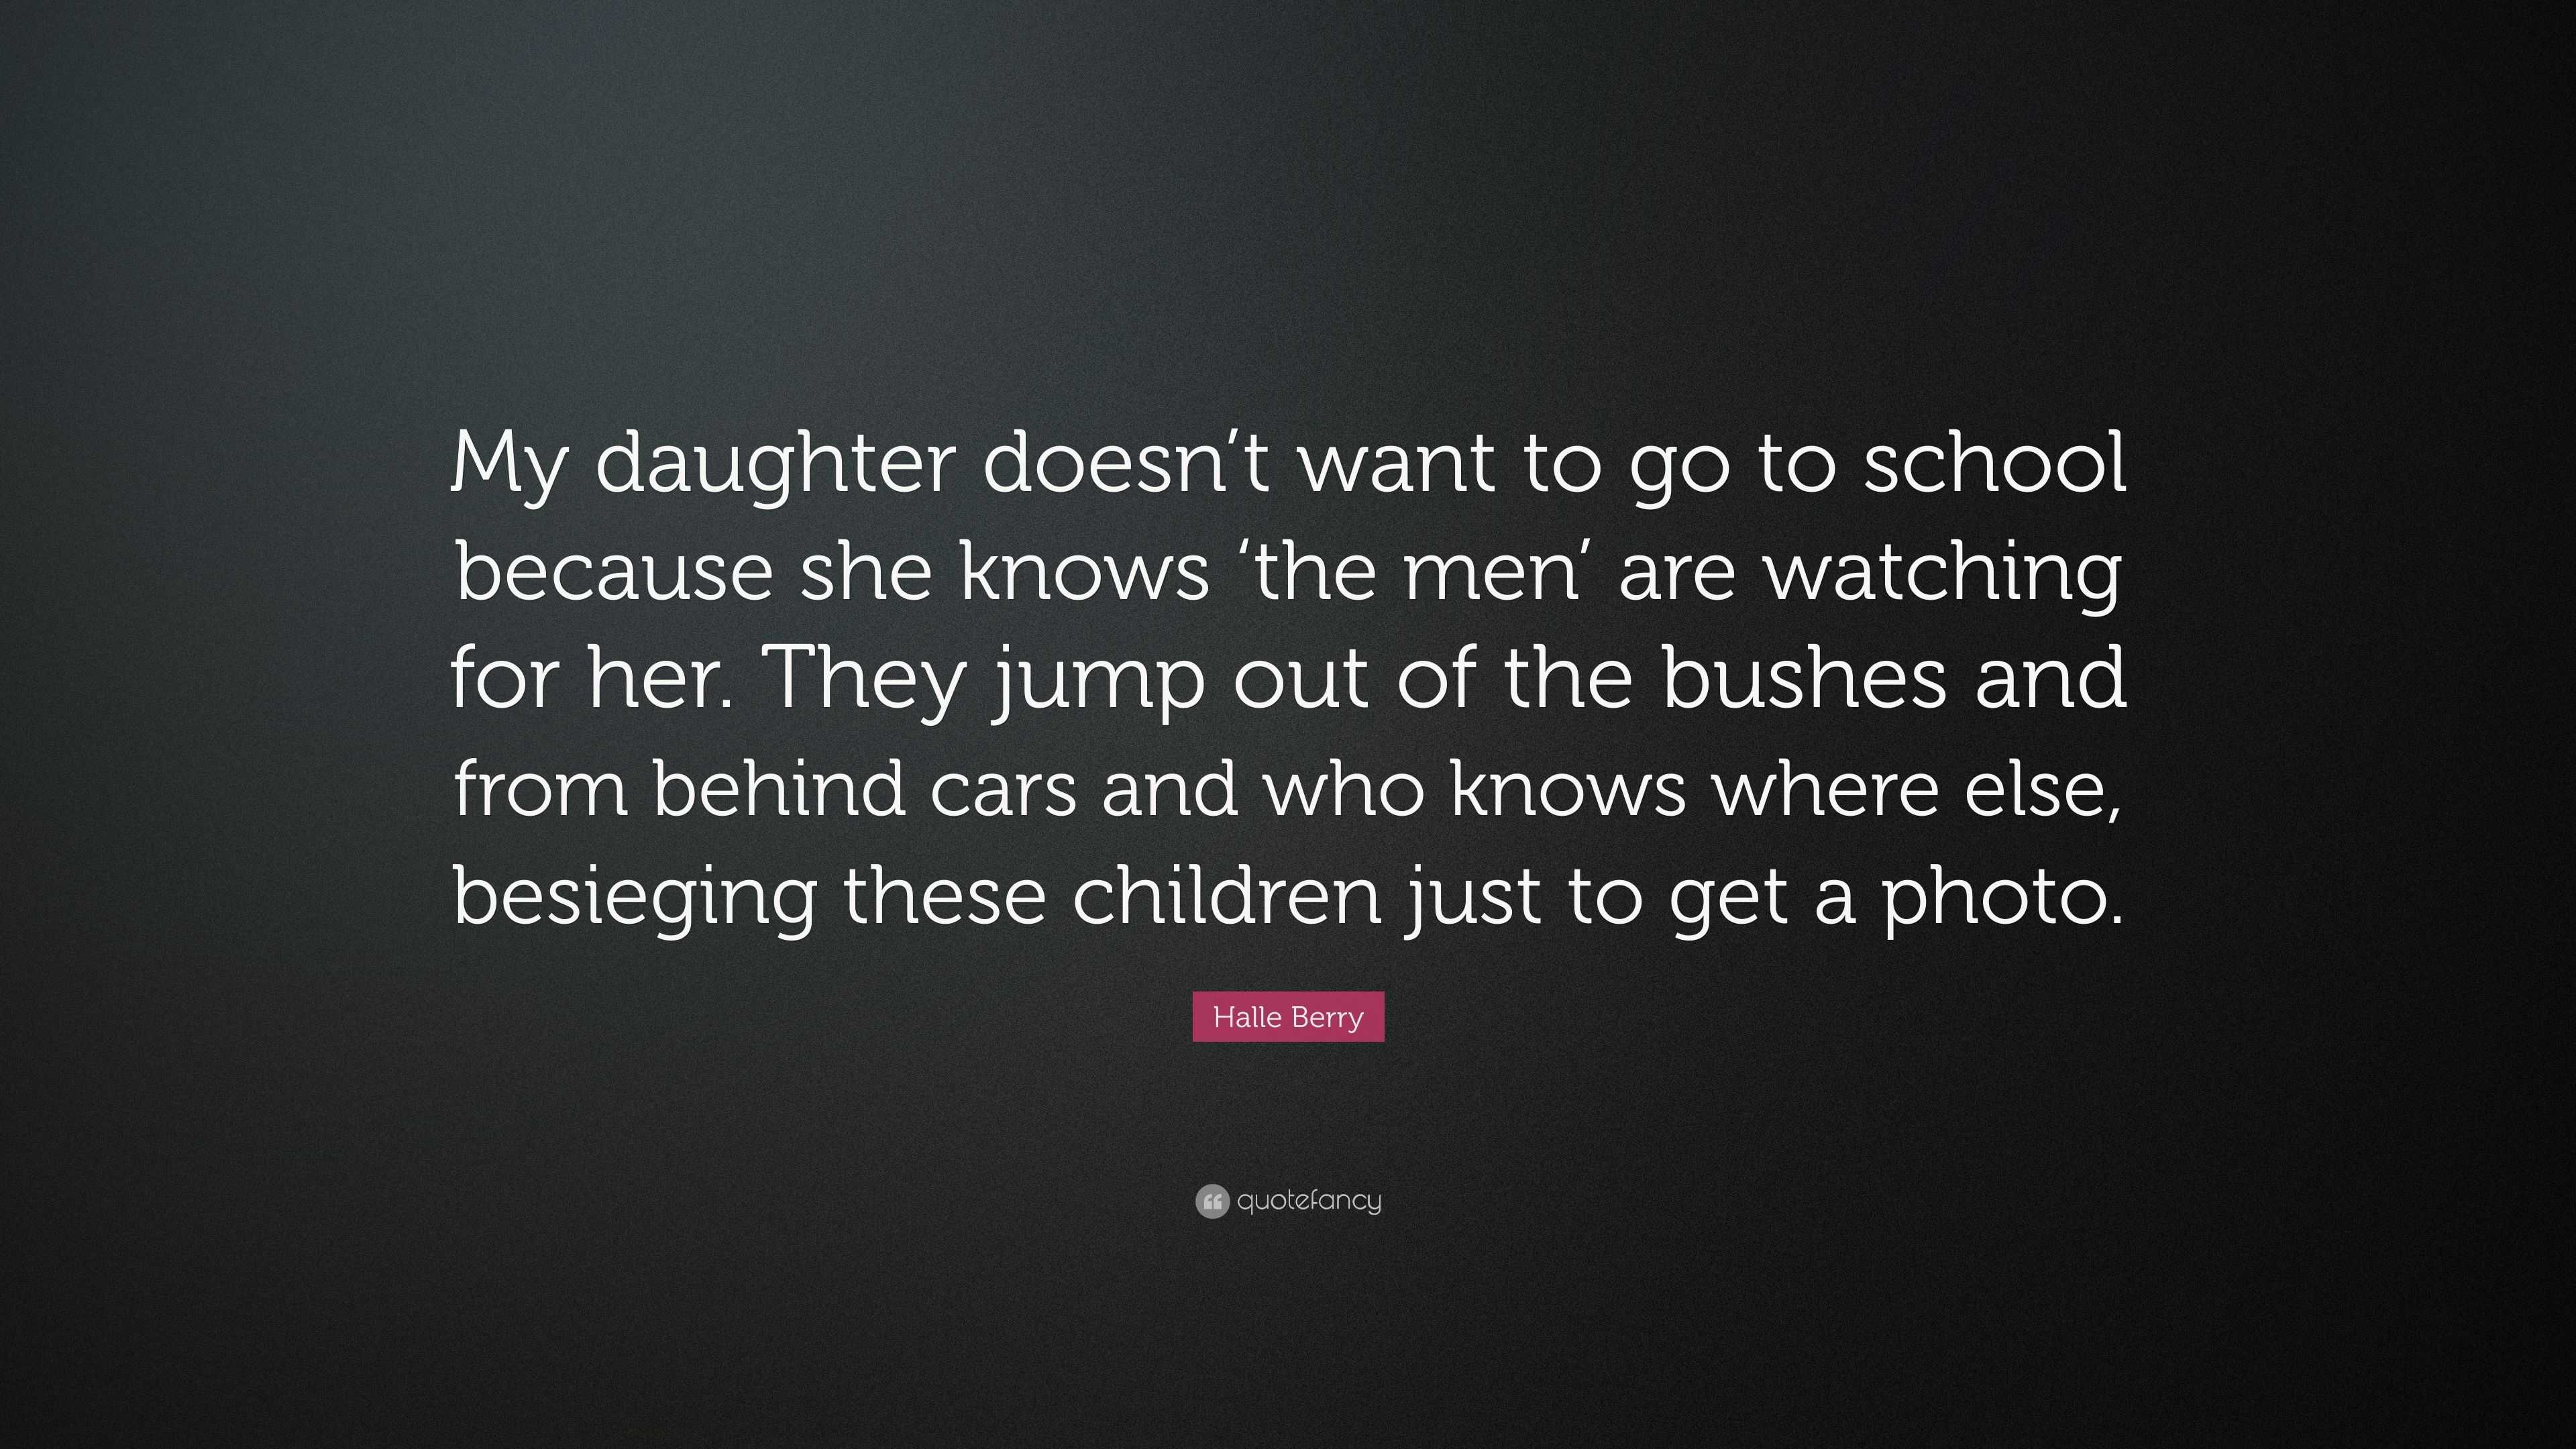 Halle Berry Quote “My daughter doesn’t want to go to school because